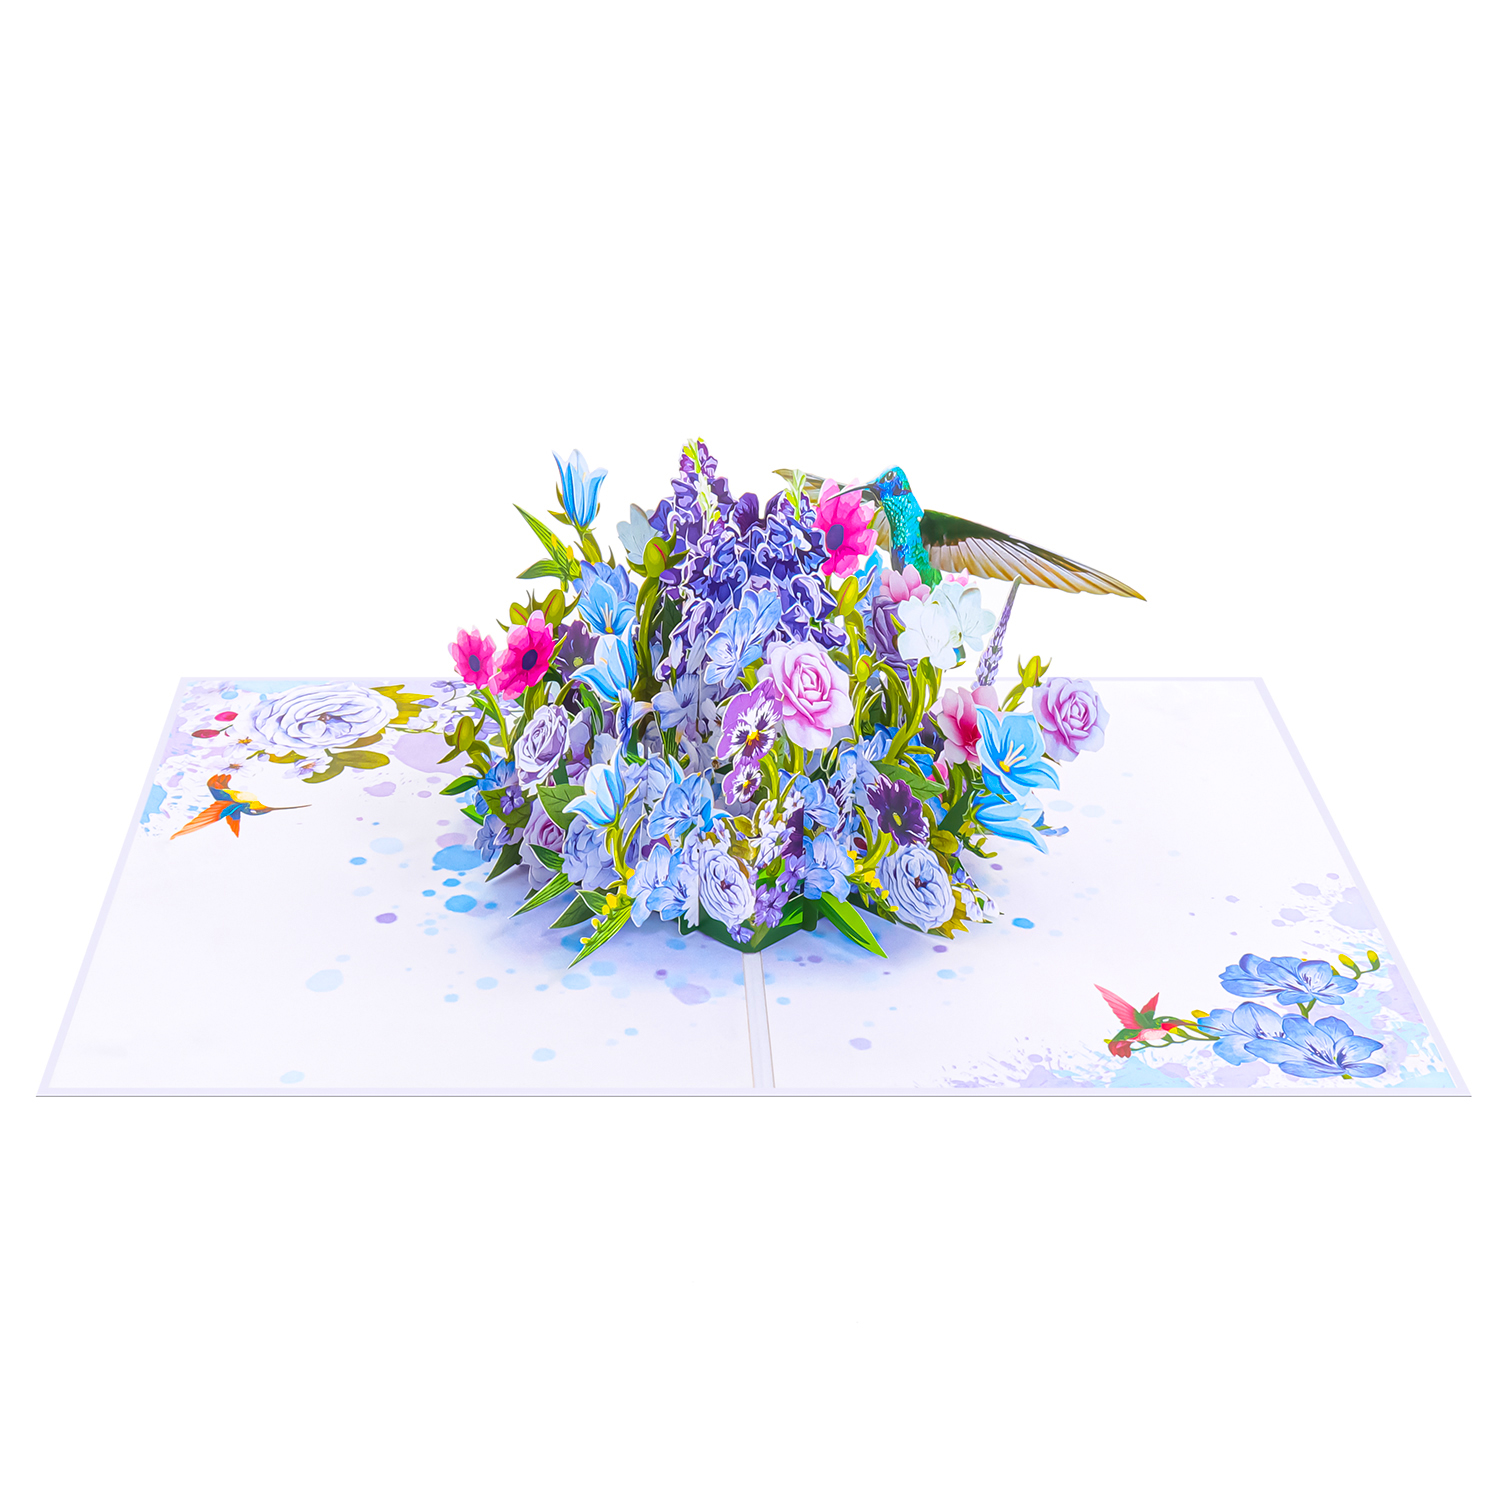 Mixed Flowers and Hummingbird Pop Up Card FL099 overview wholesale mothers day cards wholesale mothers day cards custom mother's day card pop up card wholesale manufacturer 3d pop up cards wholesale 3d greeting cards wholesale flowers hummingbird 3d card